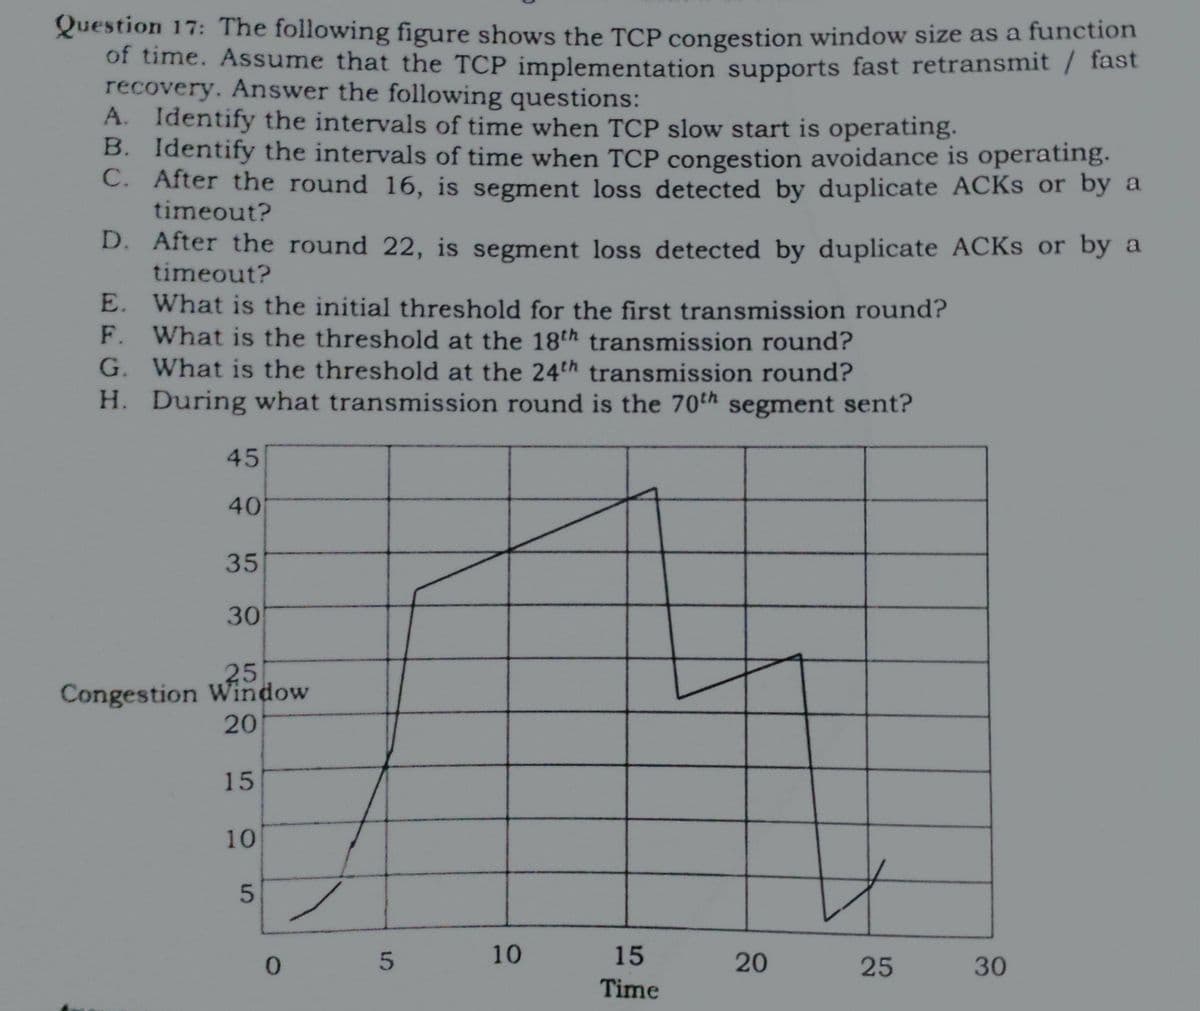 Question 17: The following figure shows the TCP congestion window size as a function
of time. Assume that the TCP implementation supports fast retransmit / fast
recovery. Answer the following questions:
A. Identify the intervals of time when TCP slow start is operating.
B. Identify the intervals of time when TCP congestion avoidance is operating.
C. After the round 16, is segment loss detected by duplicate ACKS or by a
timeout?
D. After the round 22, is segment loss detected by duplicate ACKS or by a
timeout?
E. What is the initial threshold for the first transmission round?
F. What is the threshold at the 18th transmission round?
G. What is the threshold at the 24th transmission round?
H. During what transmission round is the 70th segment sent?
45
40
35
30
25
Congestion Window
20
15
10
10
15
0.
25
30
Time
20
